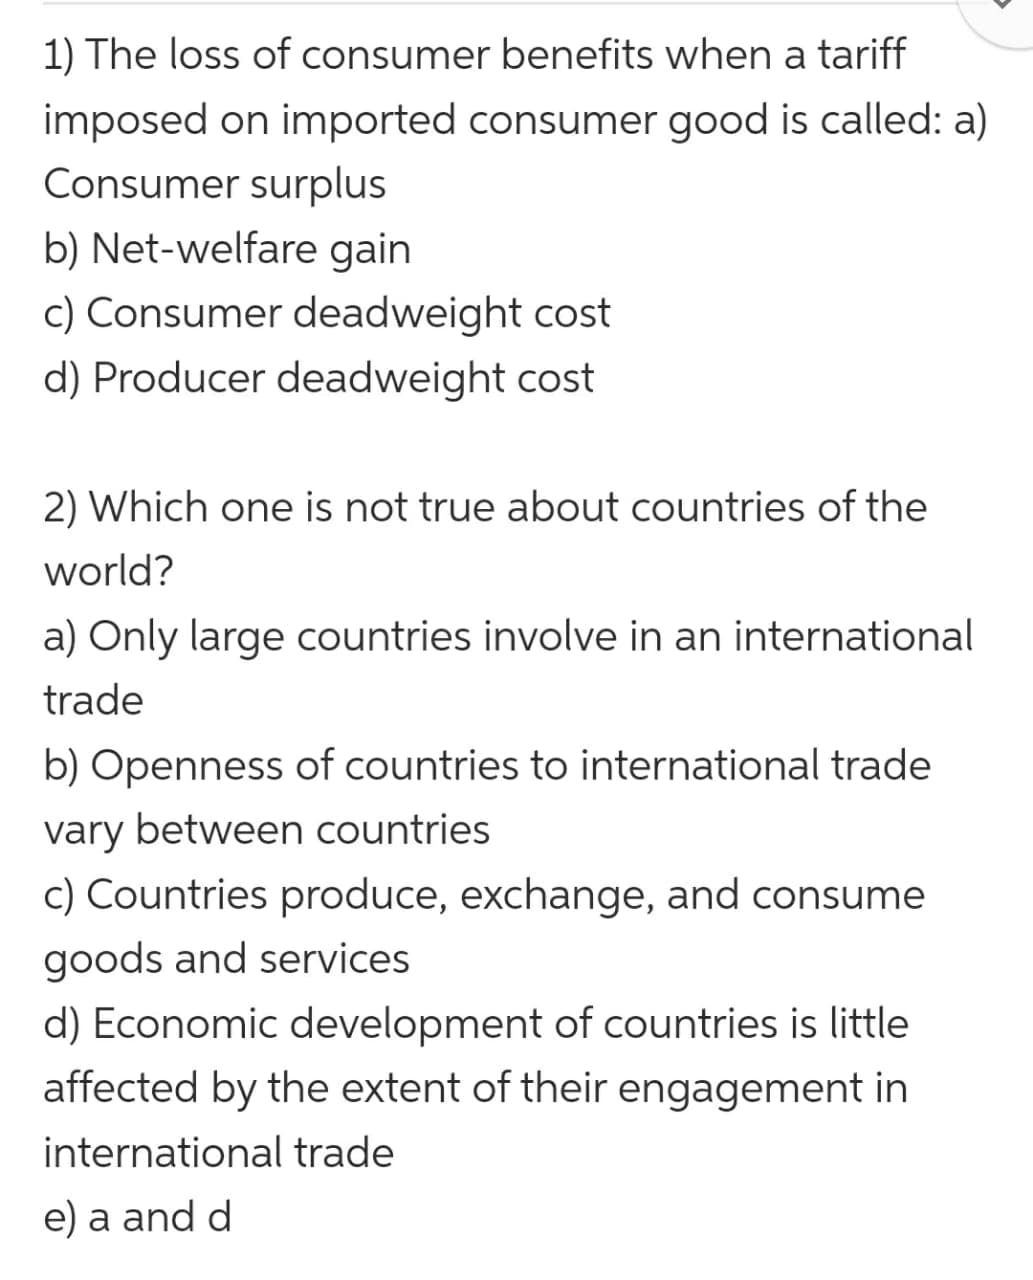 1) The loss of consumer benefits when a tariff
imposed on imported consumer good is called: a)
Consumer surplus
b) Net-welfare gain
c) Consumer deadweight cost
d) Producer deadweight cost
2) Which one is not true about countries of the
world?
a) Only large countries involve in an international
trade
b) Openness of countries to international trade
vary between countries
c) Countries produce, exchange, and consume
goods and services
d) Economic development of countries is little
affected by the extent of their engagement in
international trade
e) a and d